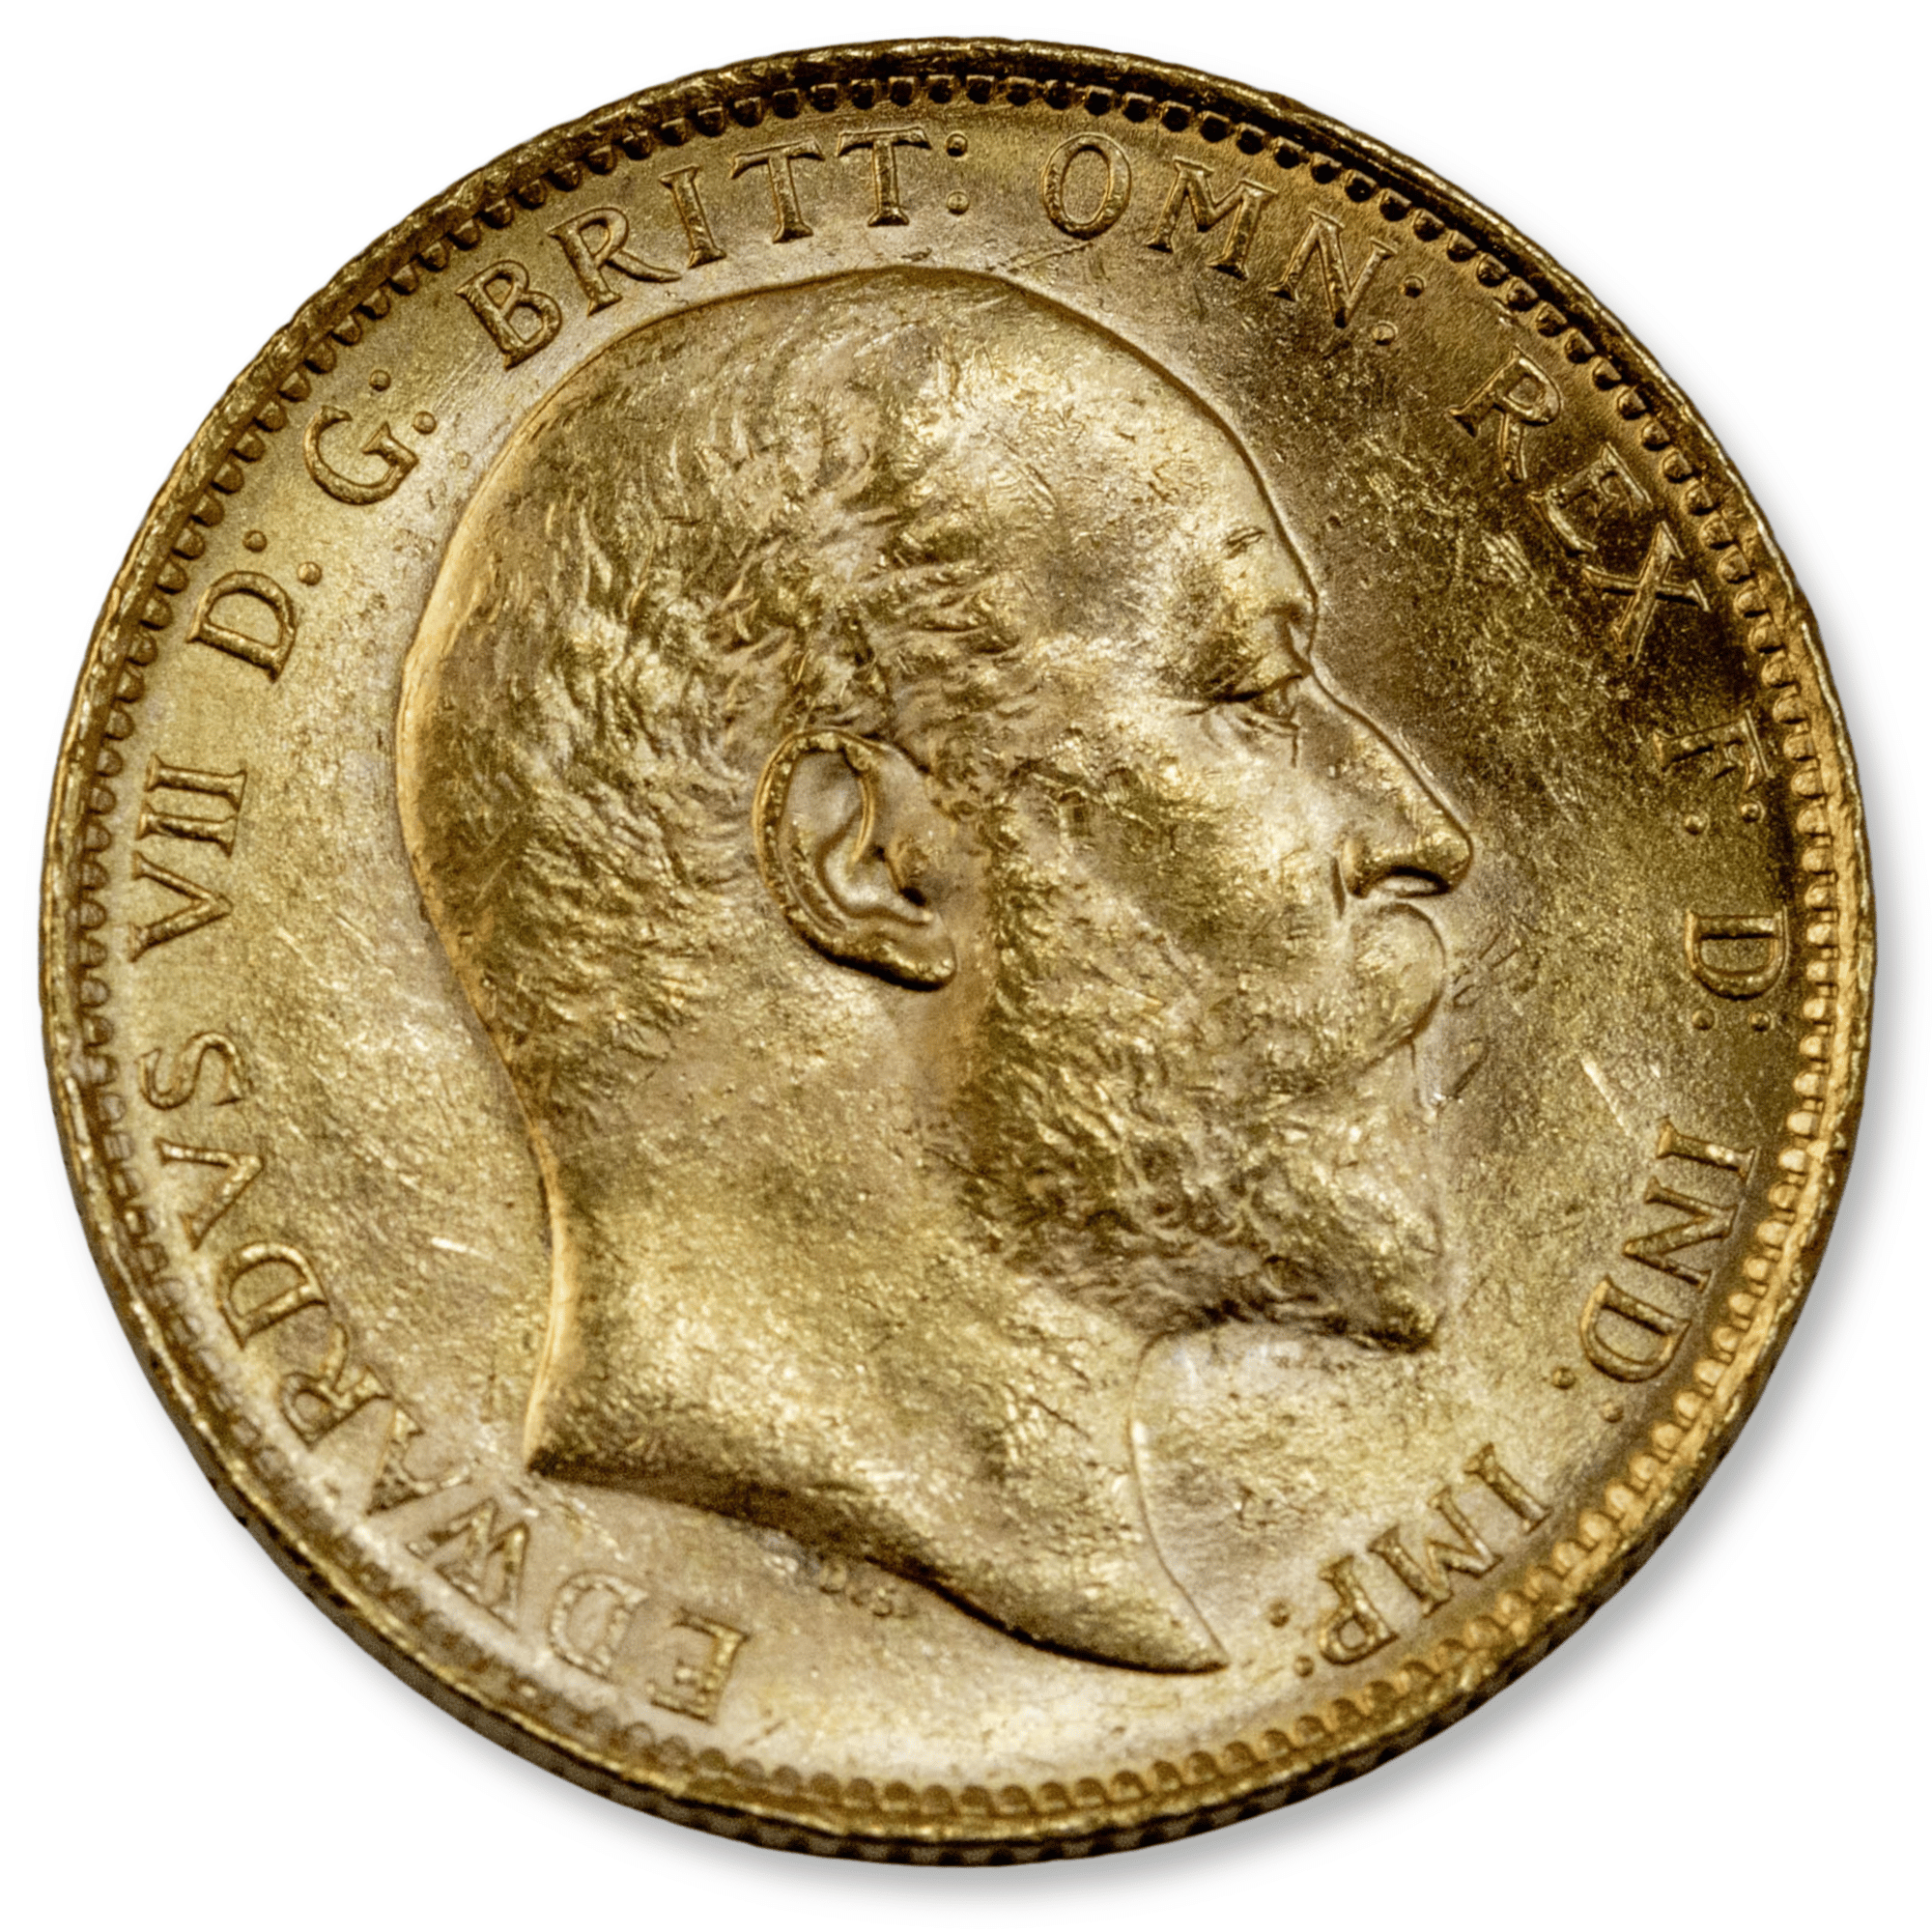 1906M Edward VII Sovereign Uncirculated